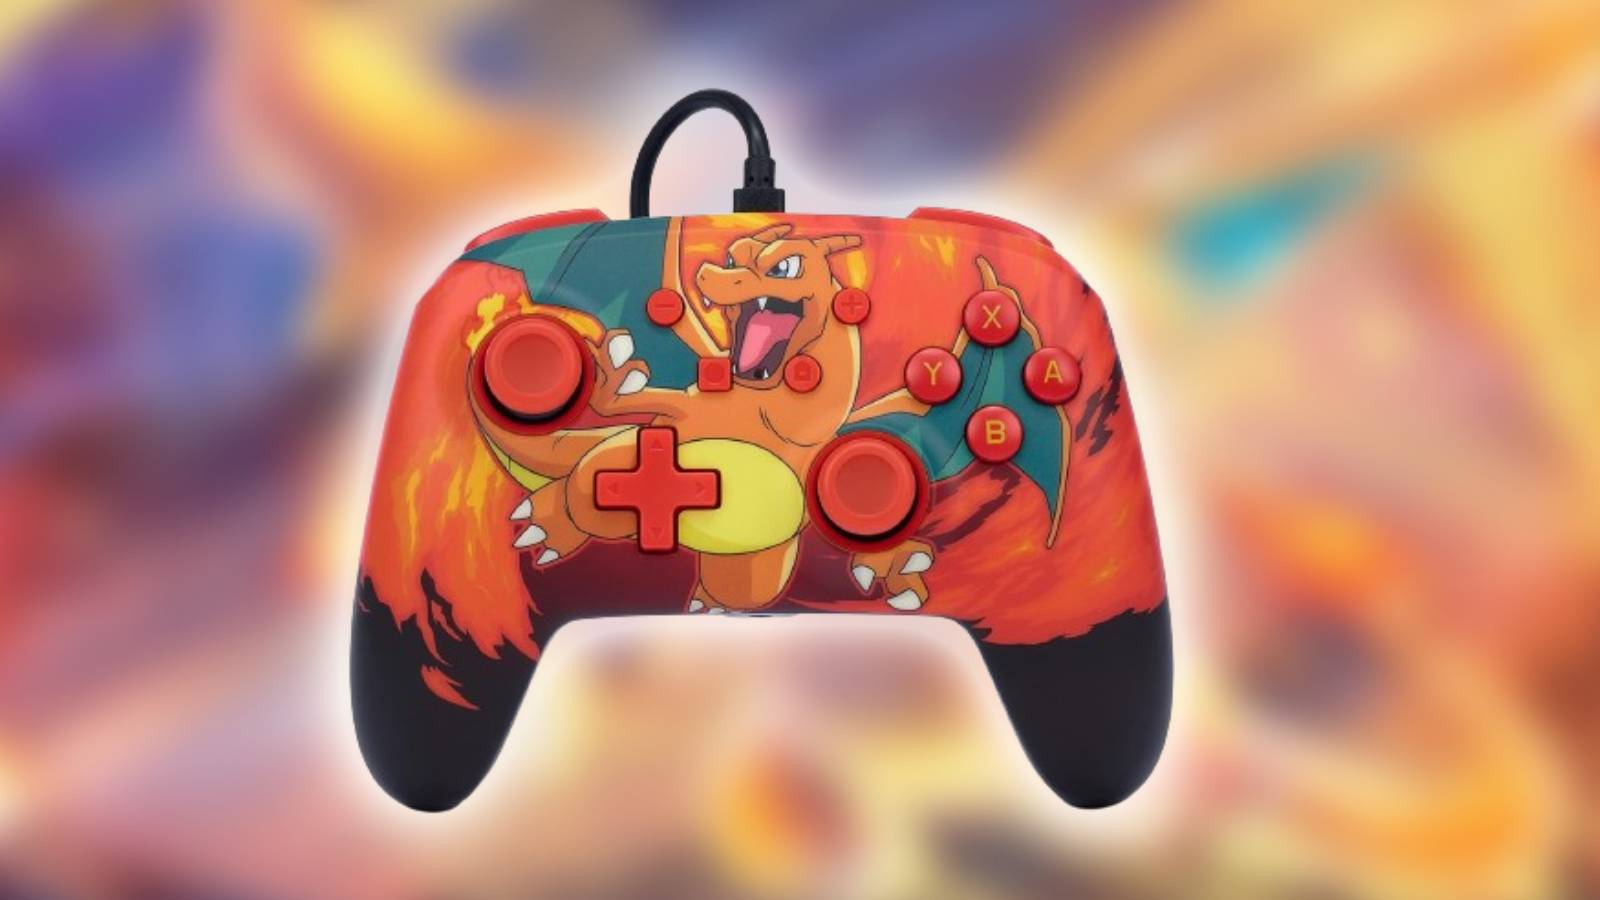 A Charizard controller is shown against a blurred background